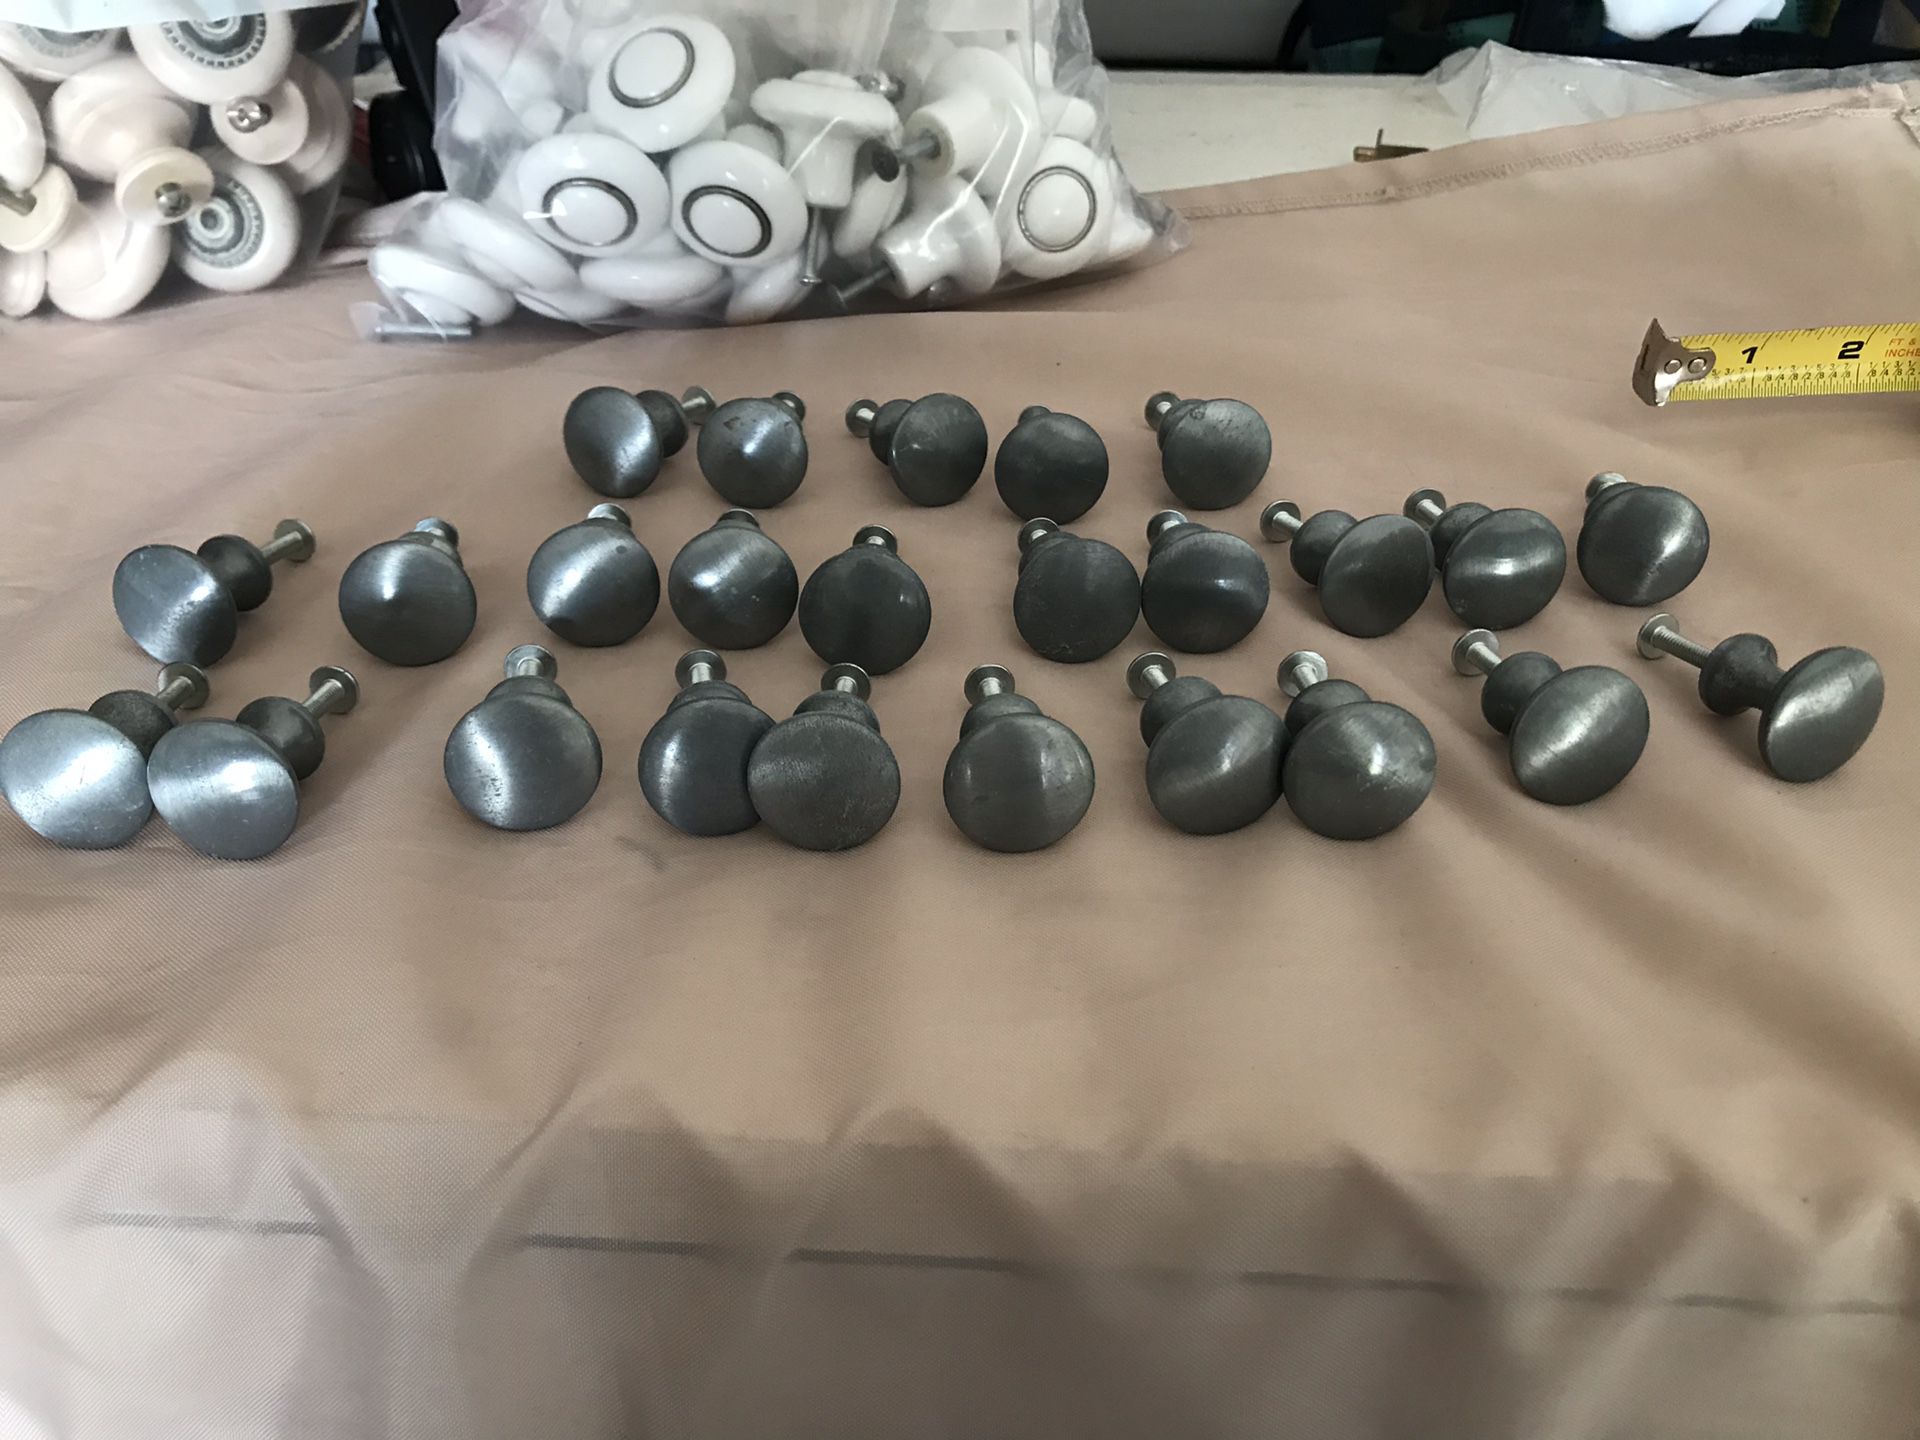 25 pewter color dresser knobs. In great condition